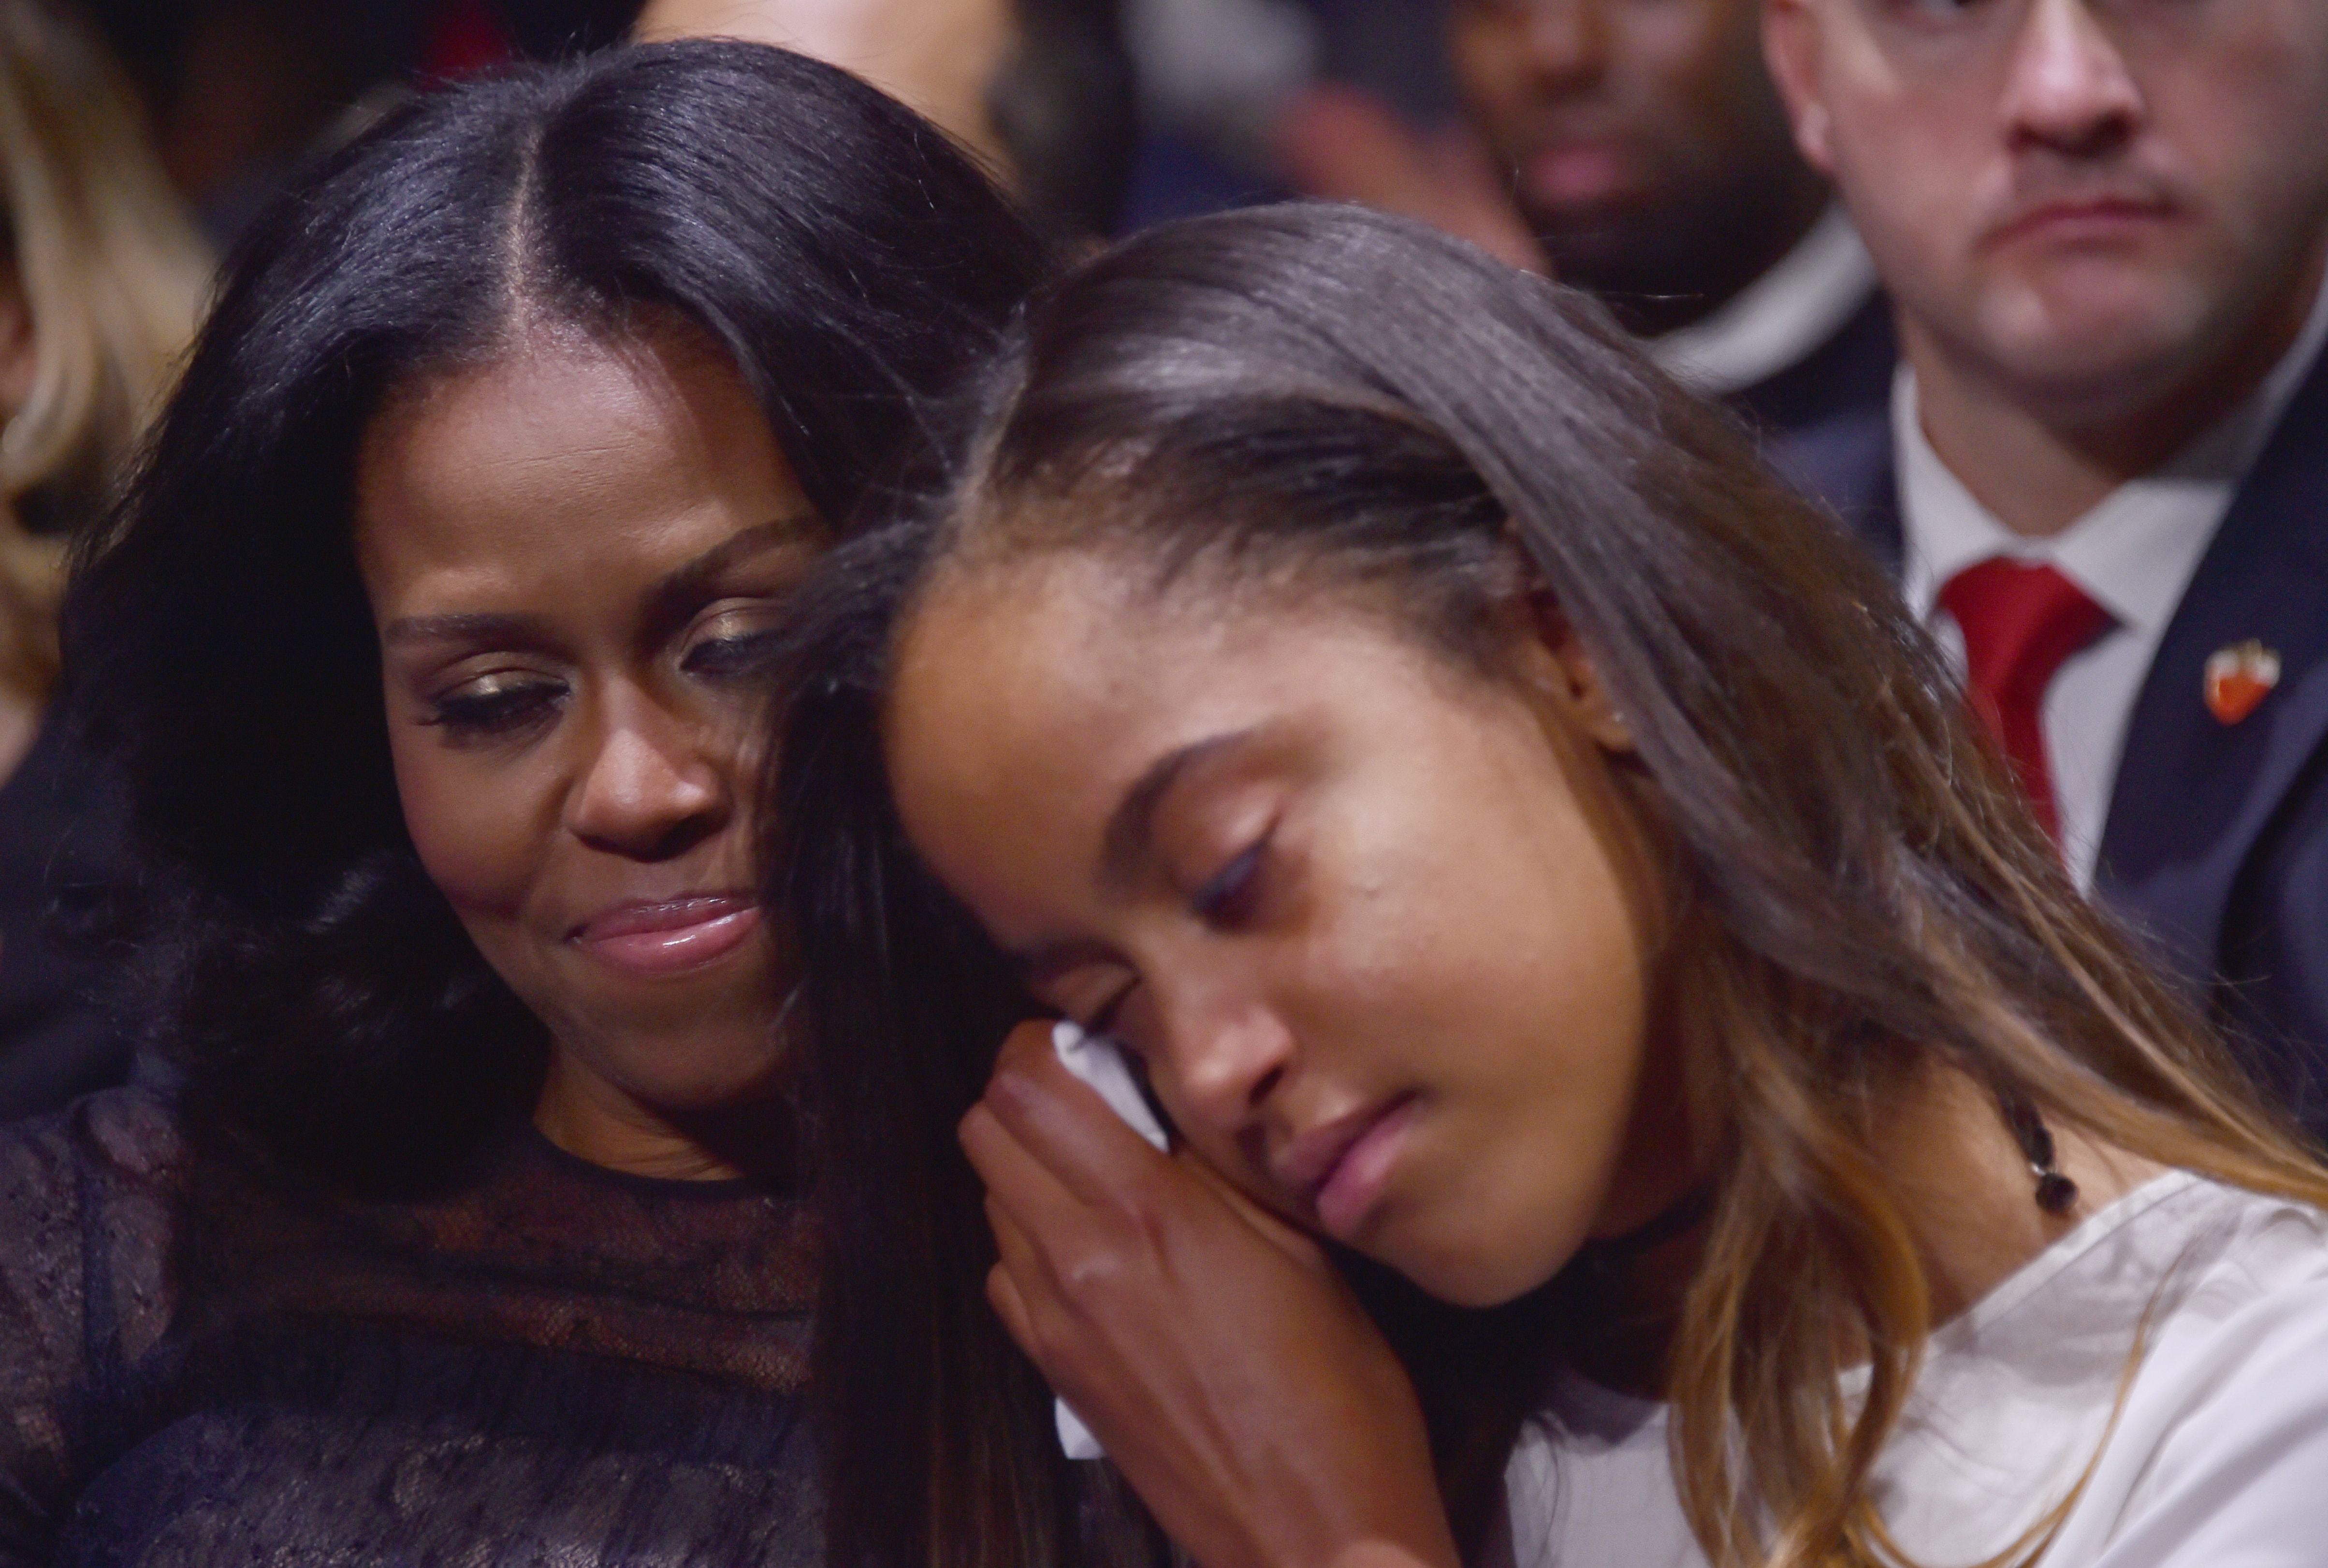 President Obama And Daughter Malia Moved To Tears As He Praised Wife Michelle During Moving Farewell Speech